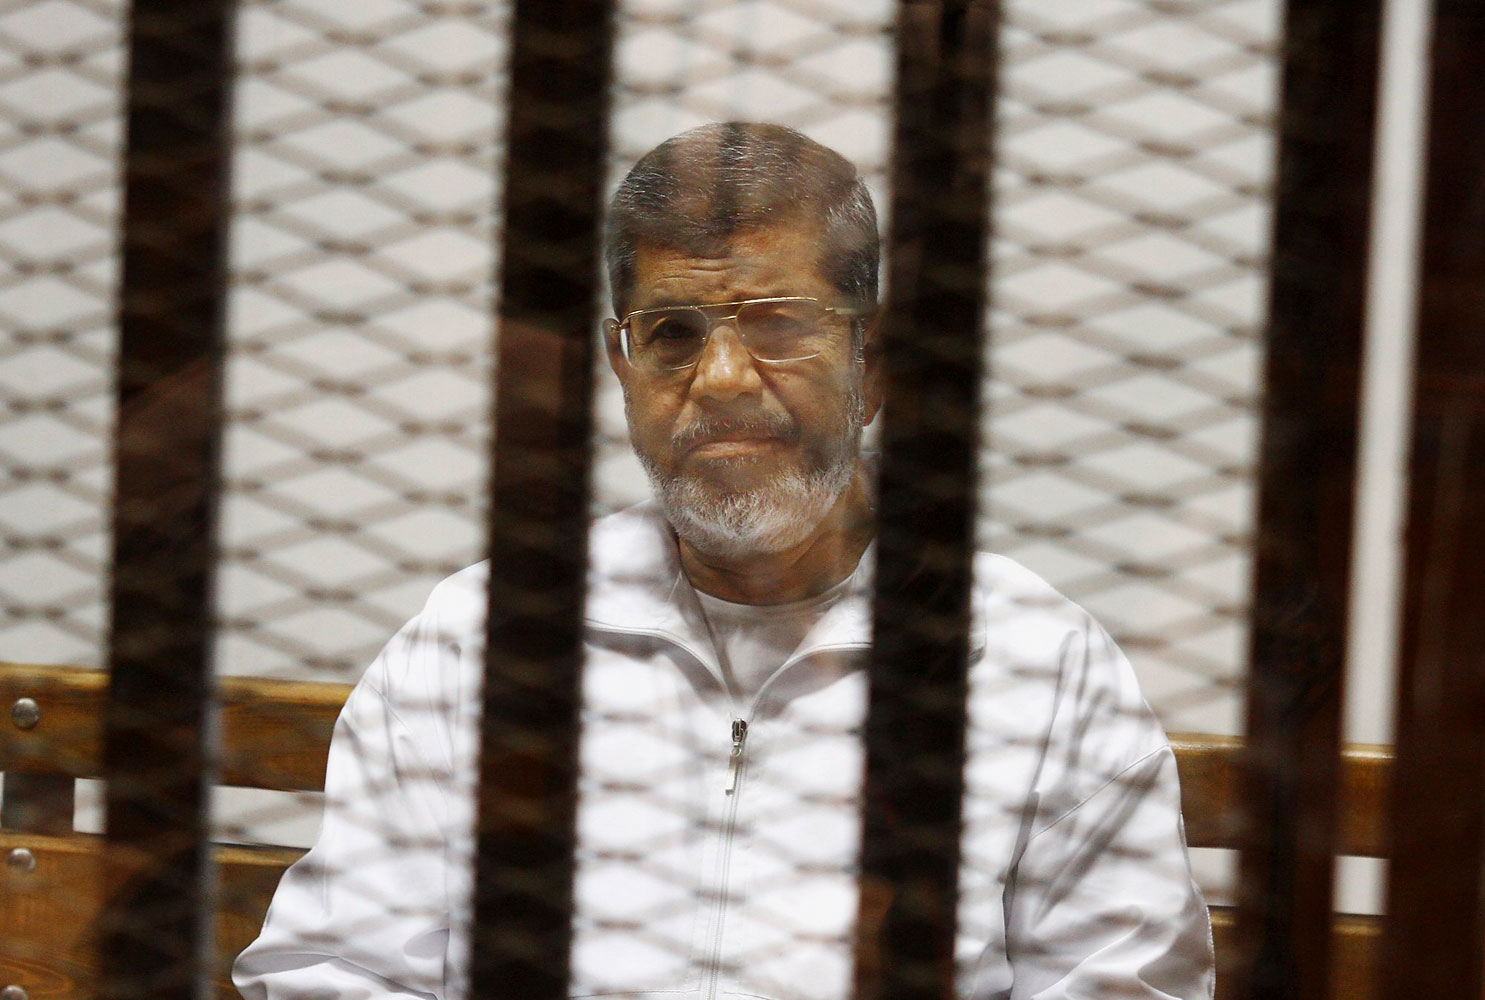 Egypt's ousted Islamist President Mohammed Morsi sits in a defendant cage in the Police Academy courthouse in Cairo, May 8, 2014. (Tarek el-Gabbas—AP)